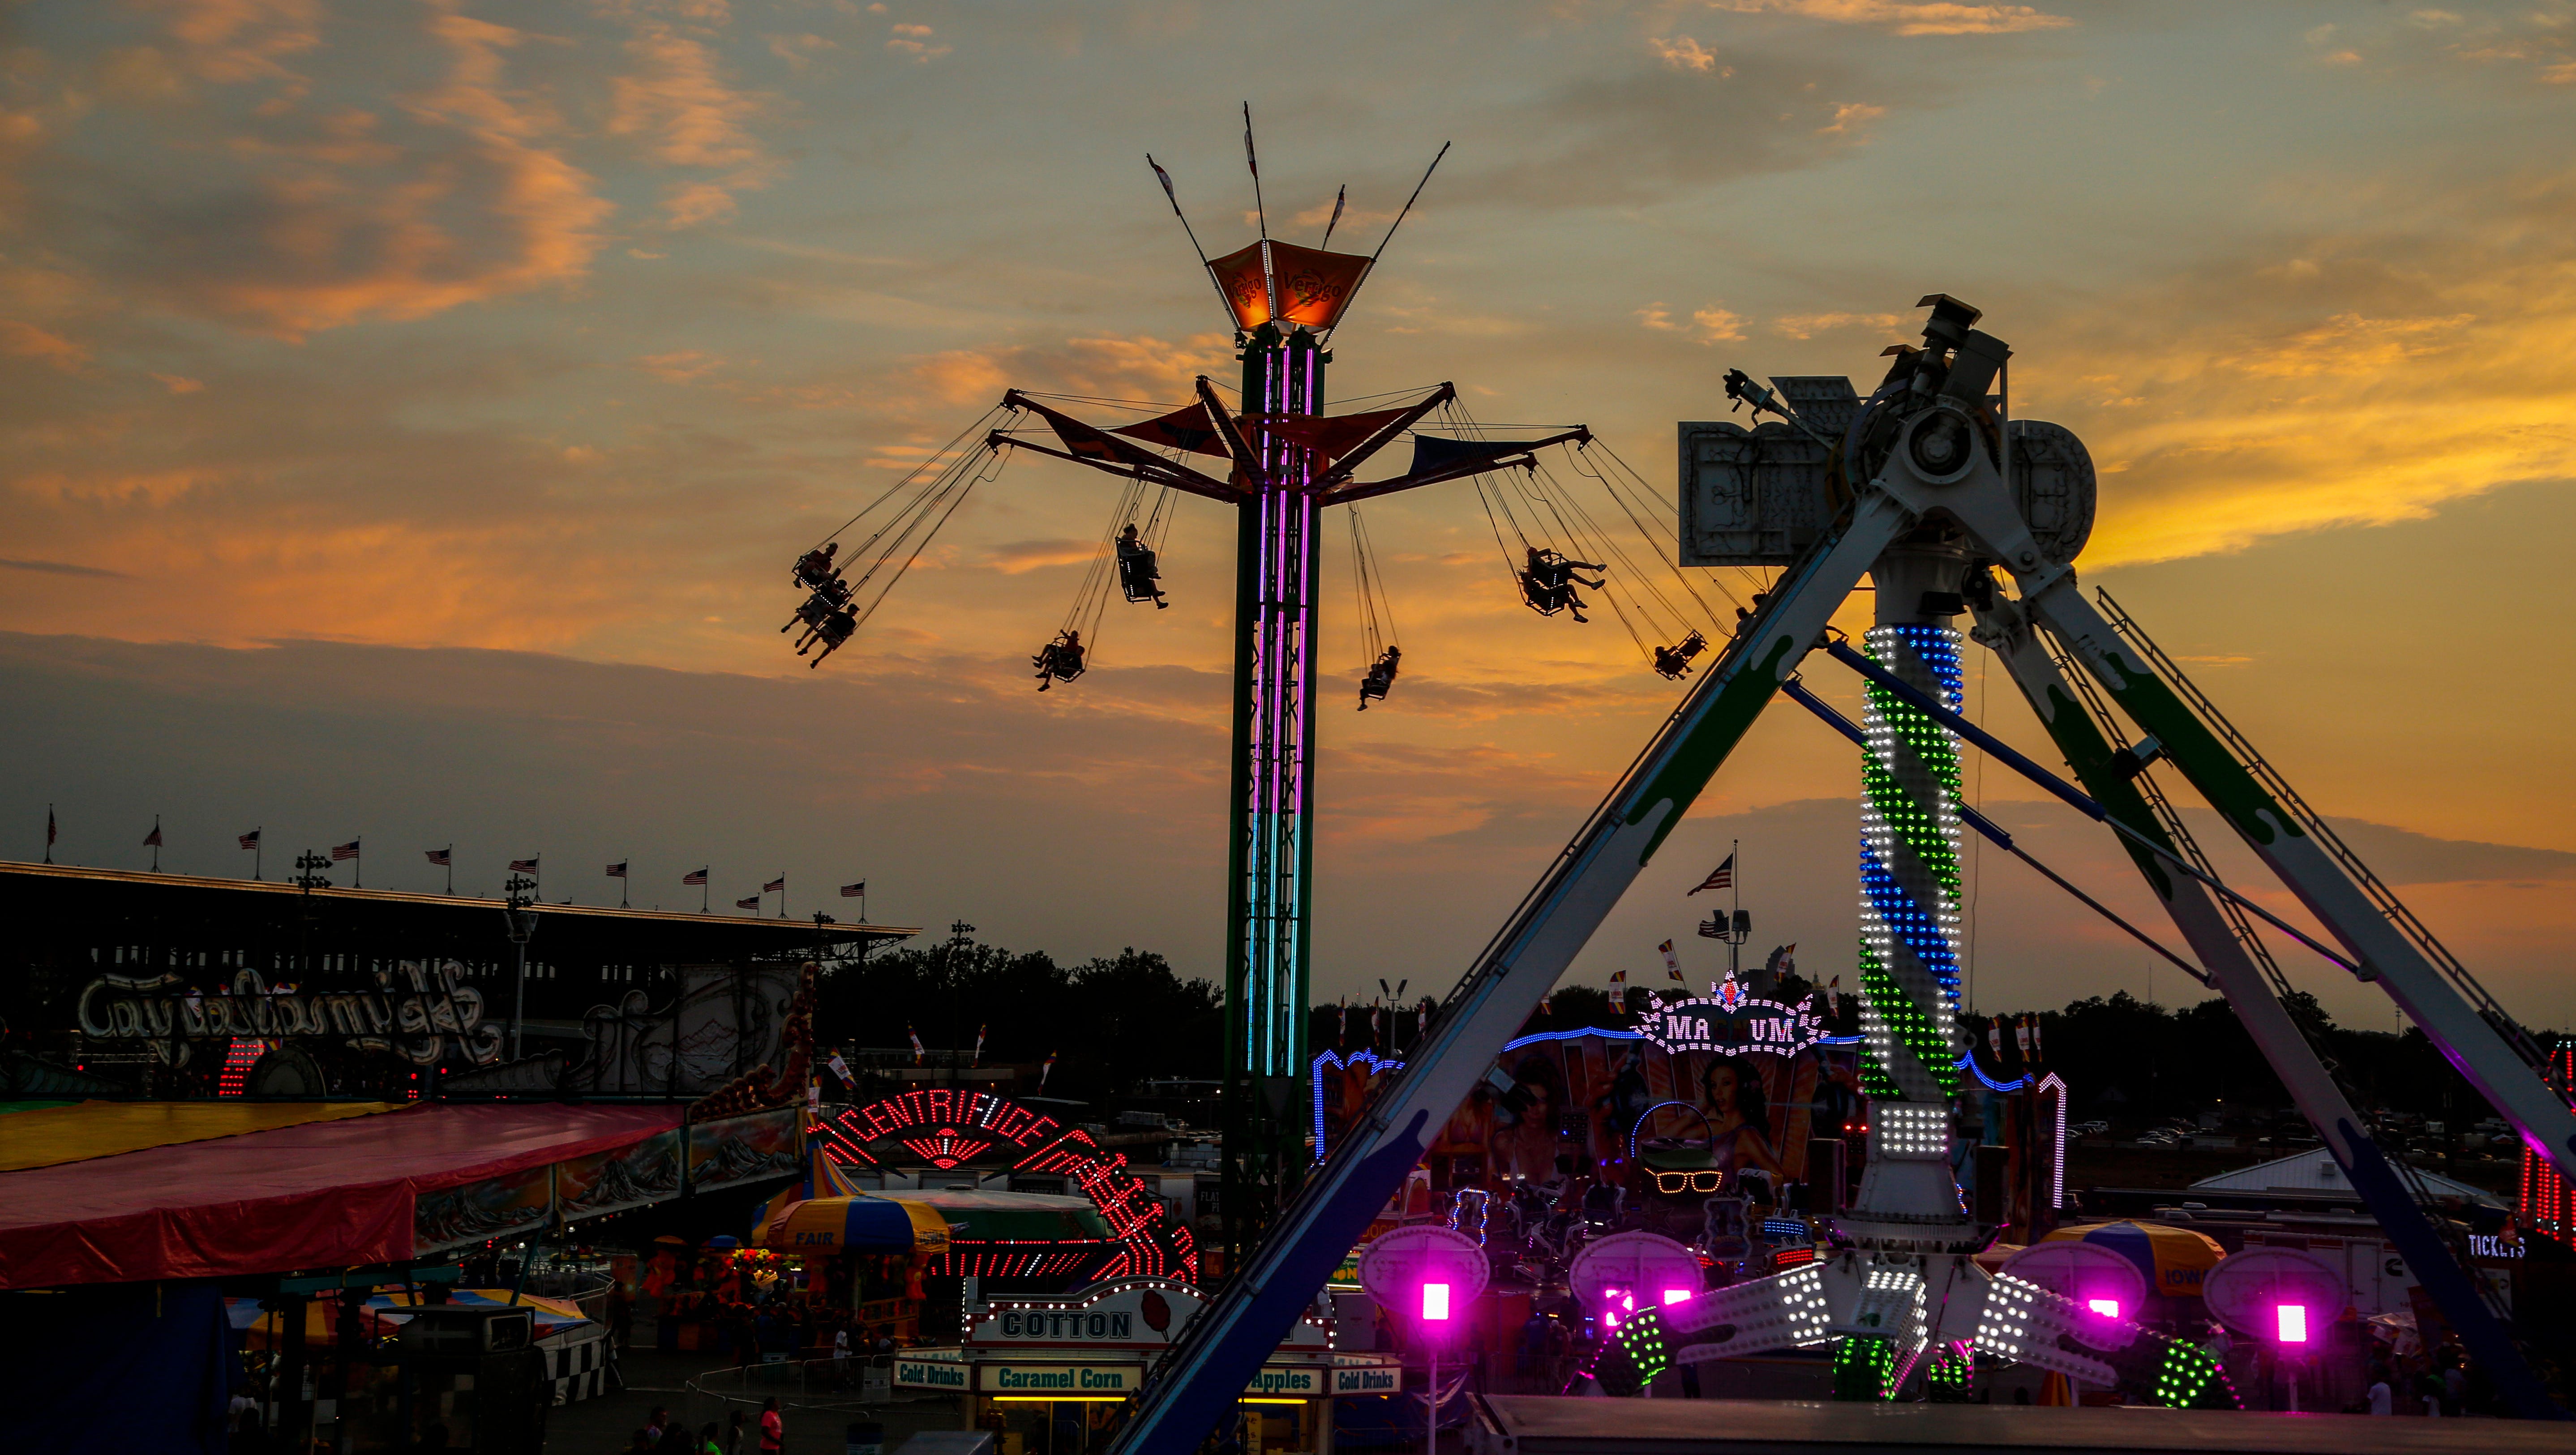 Iowa State Fair: How to save time, money and your sanity